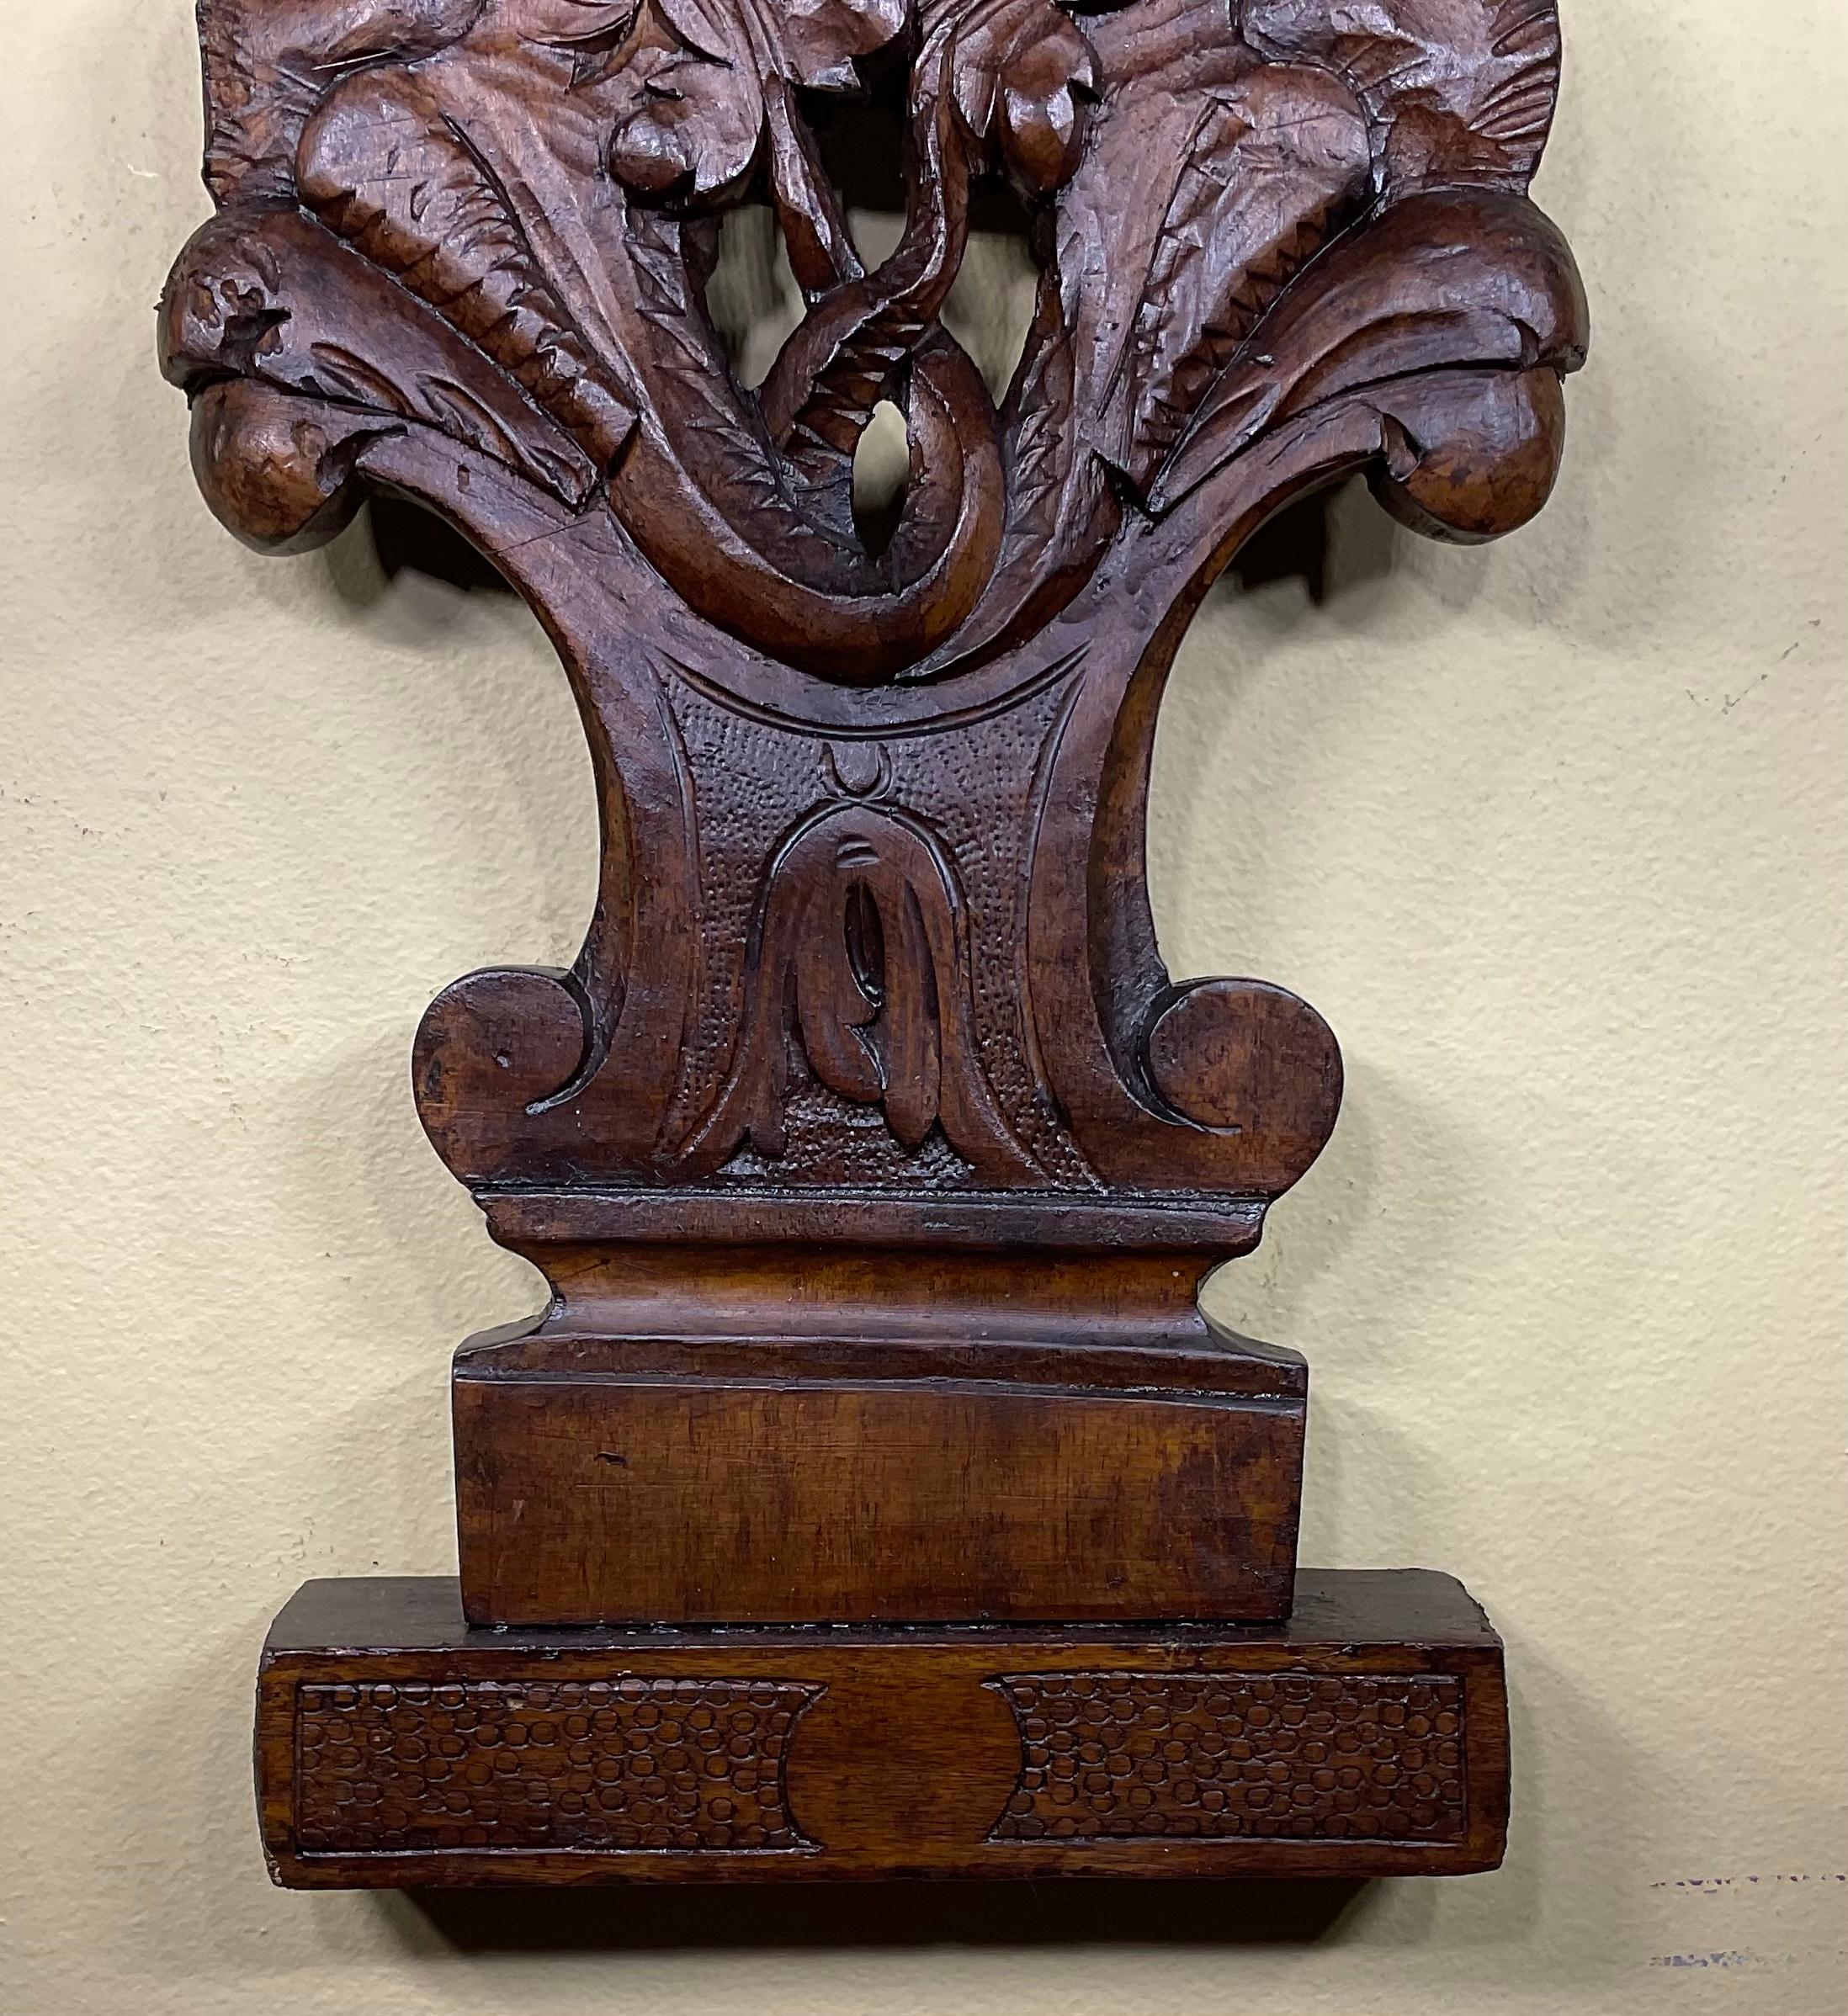 Exceptional hand carved Walnut wood sculpture of beautiful cherub face looking forward and very intricate and intriguing bottom carving.
This 19th century decorative piece was salvege from part of antique furniture, restored and refinished to